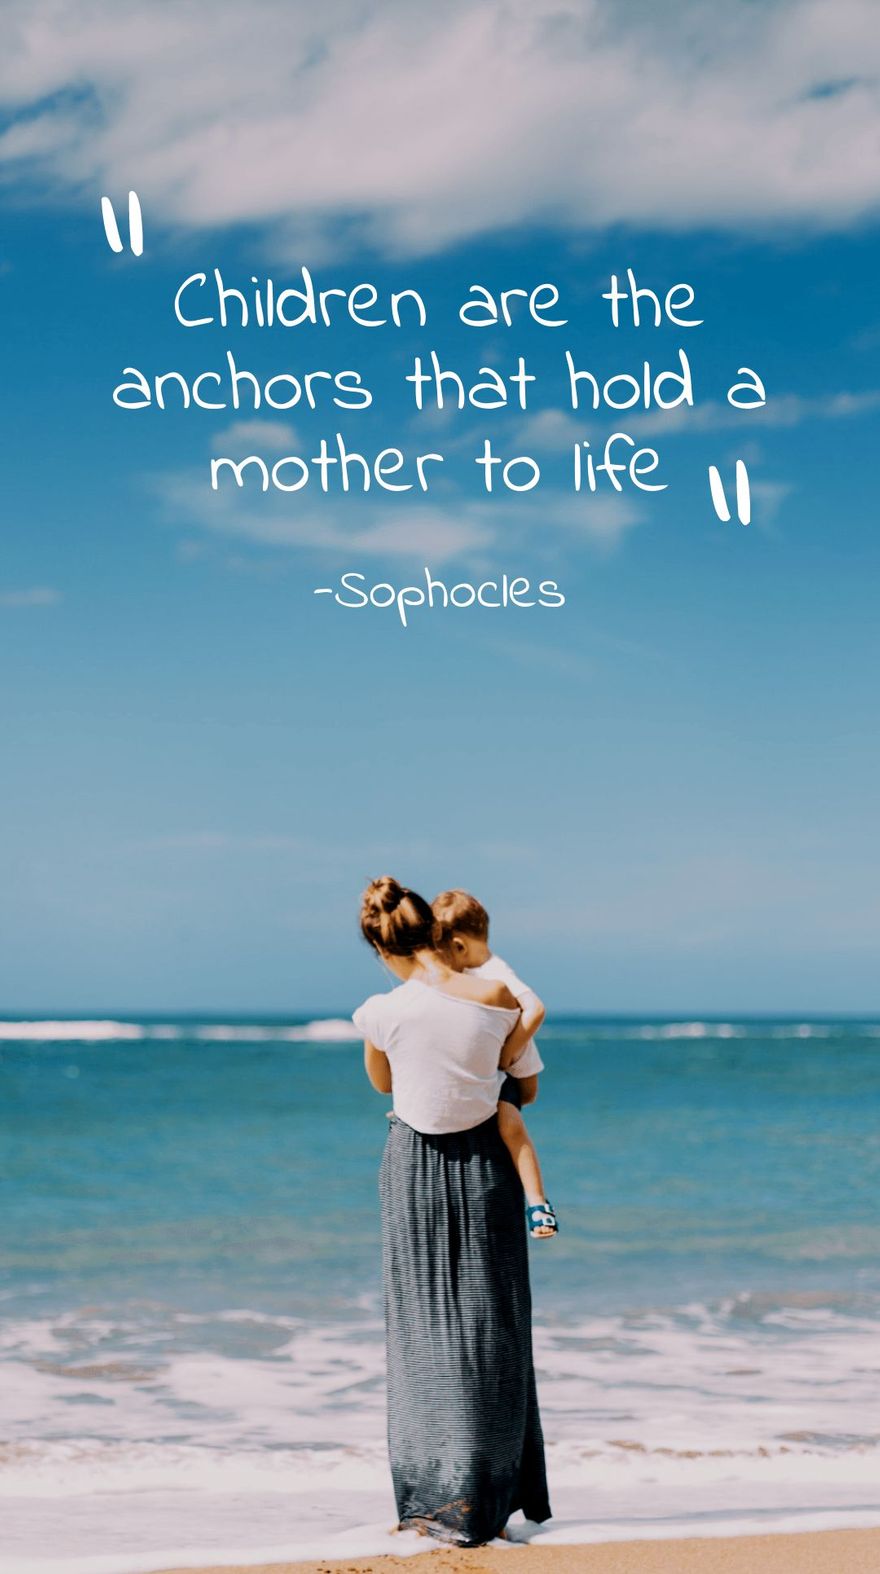 Sophocles - Children are the anchors that hold a mother to life. 